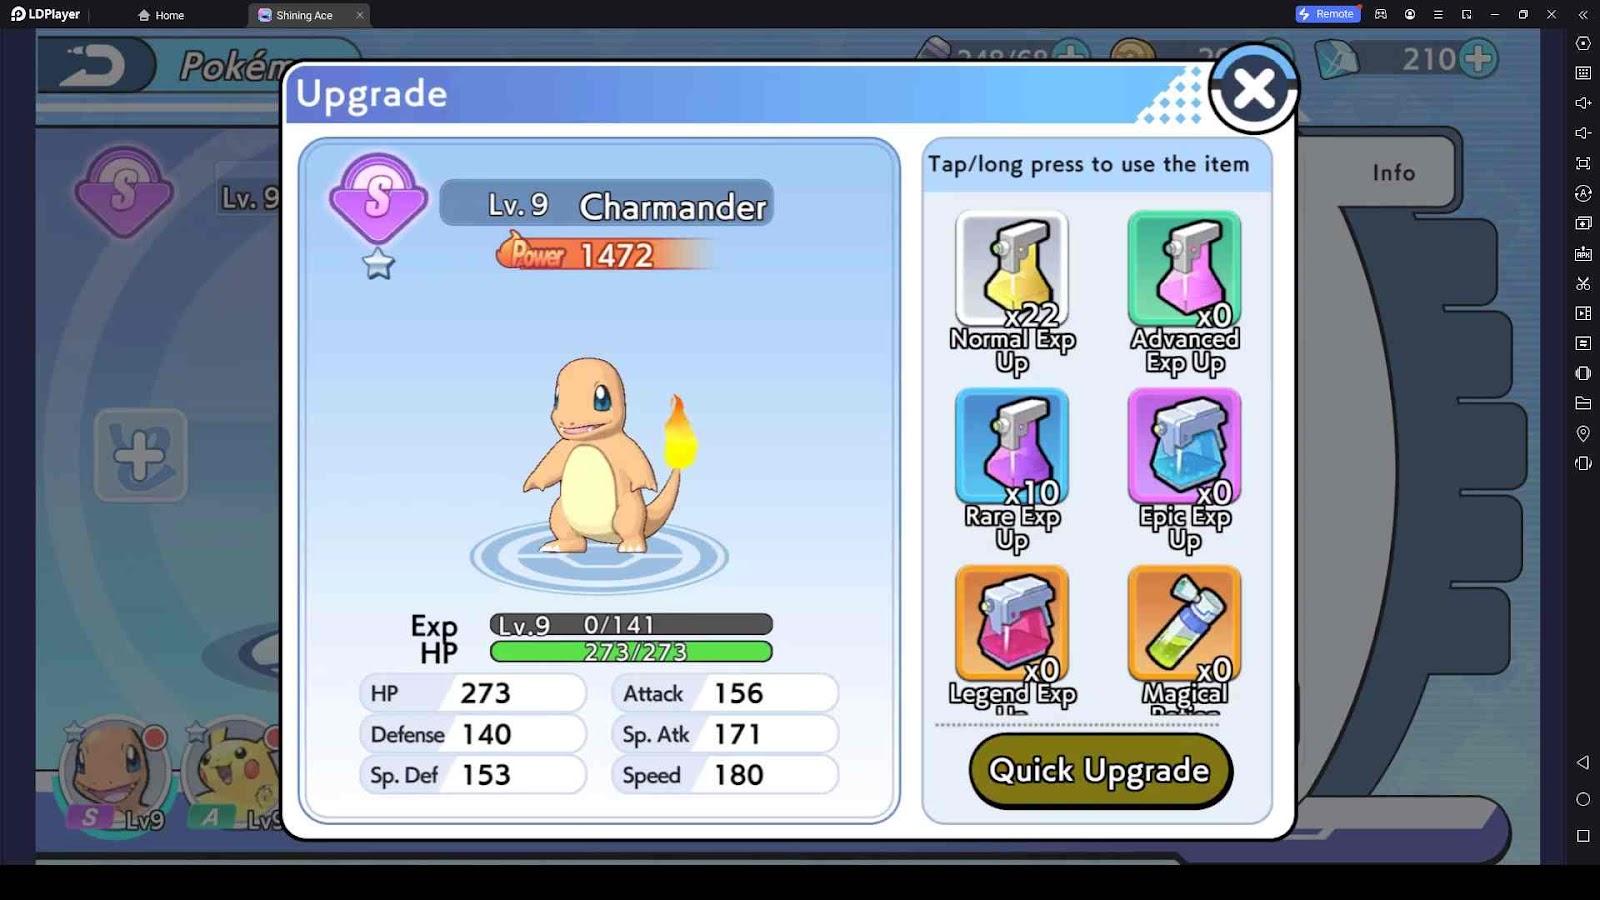 Upgrade Your Pokémons in Shining Ace